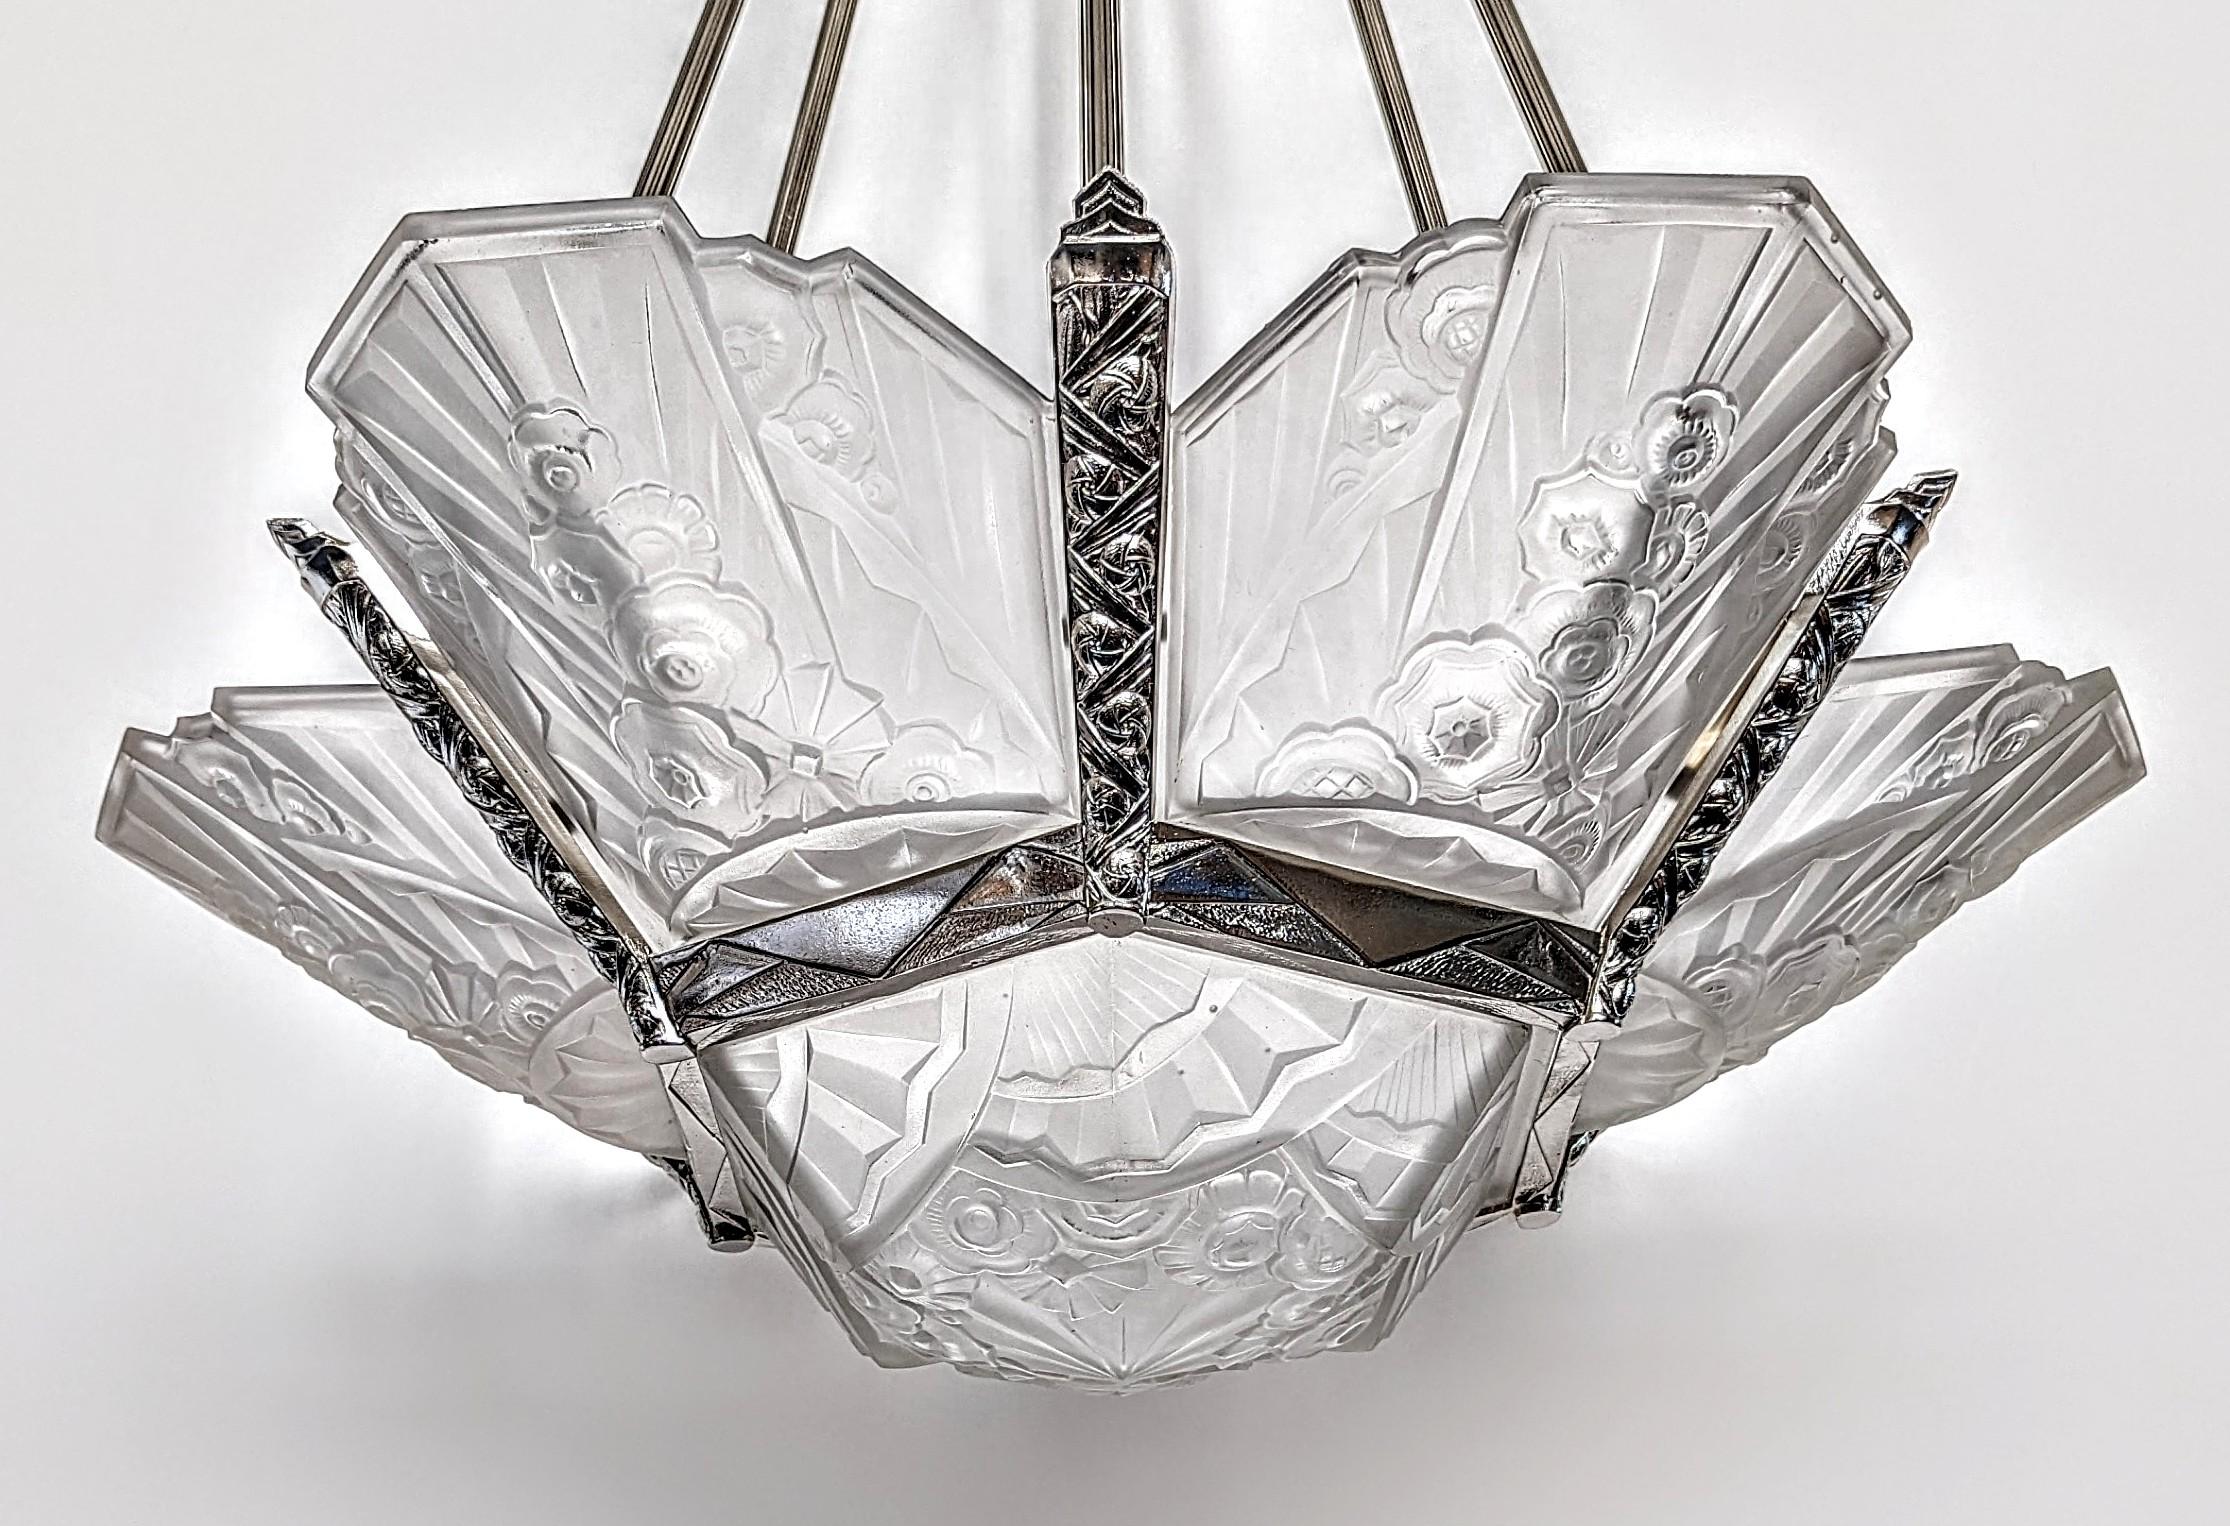 A stunning French Art Deco chandelier in grand scale (26